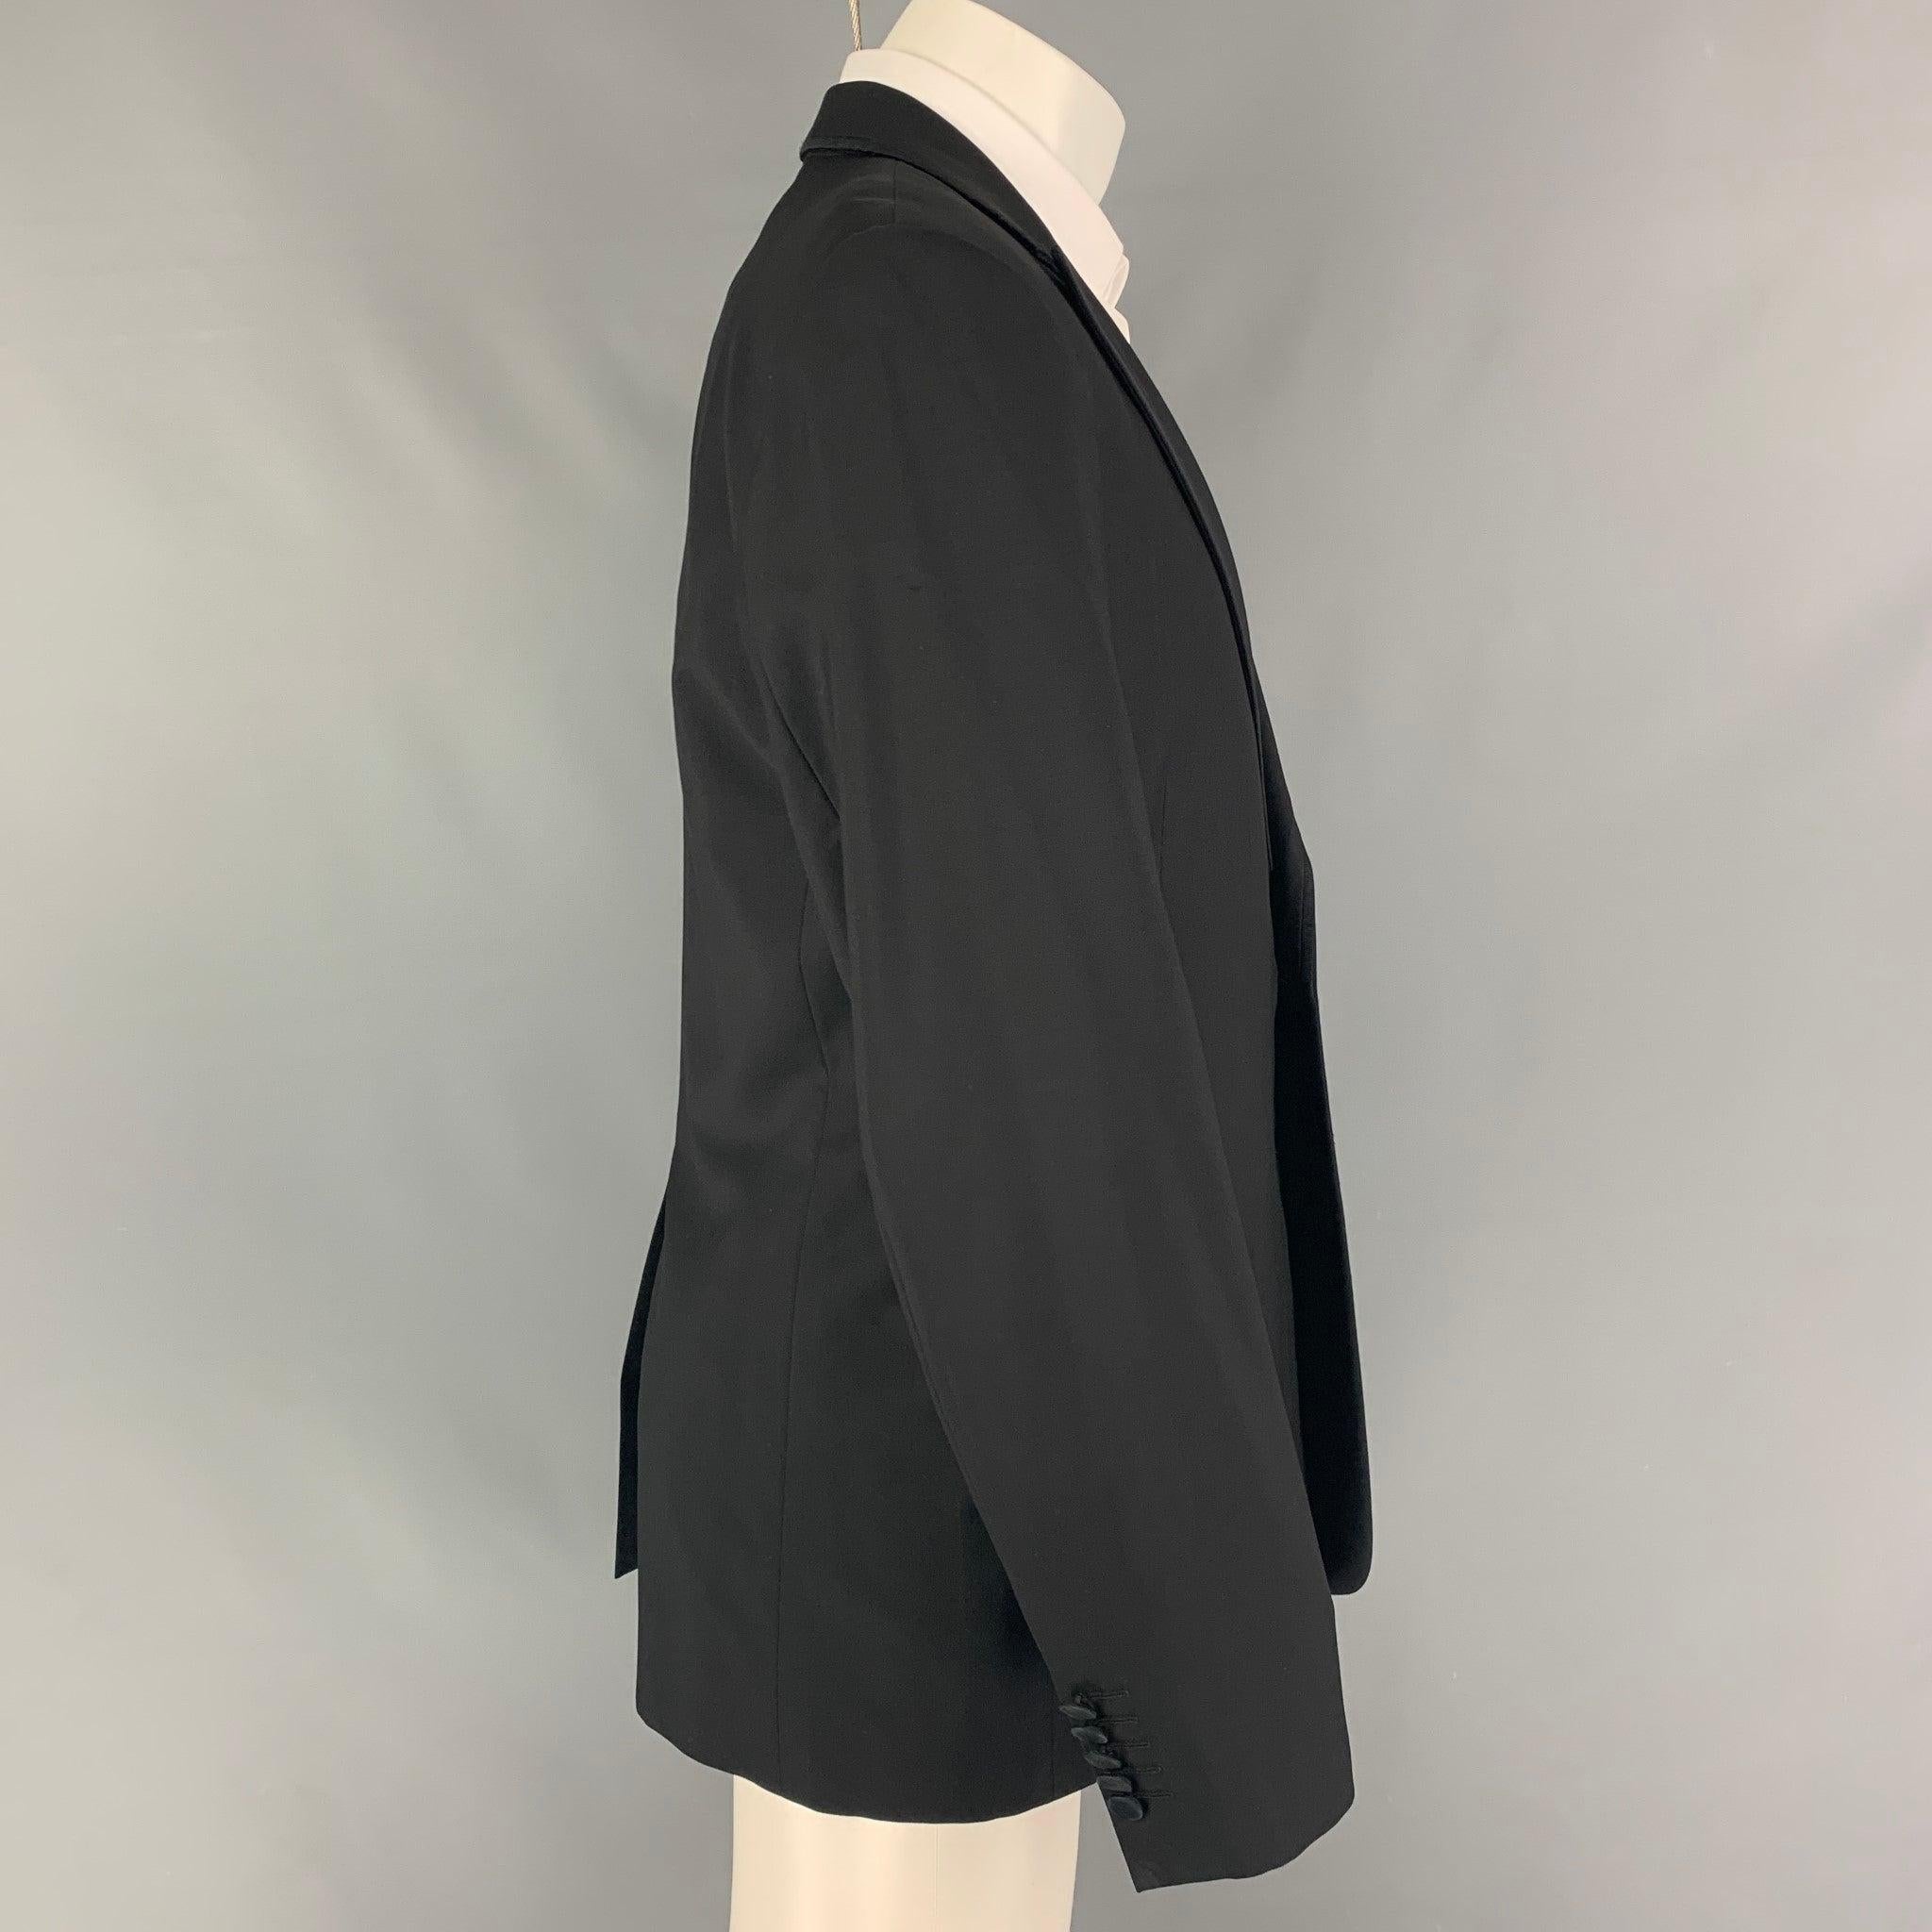 PAUL SMITH 'The Byard' sport coat comes in a black wool with a full liner featuring a peak lapel, flap pockets, single back vent, and a single button closure. Made in Italy.
Very Good
Pre-Owned Condition. Fabric tag removed.  

Marked:   Size tag